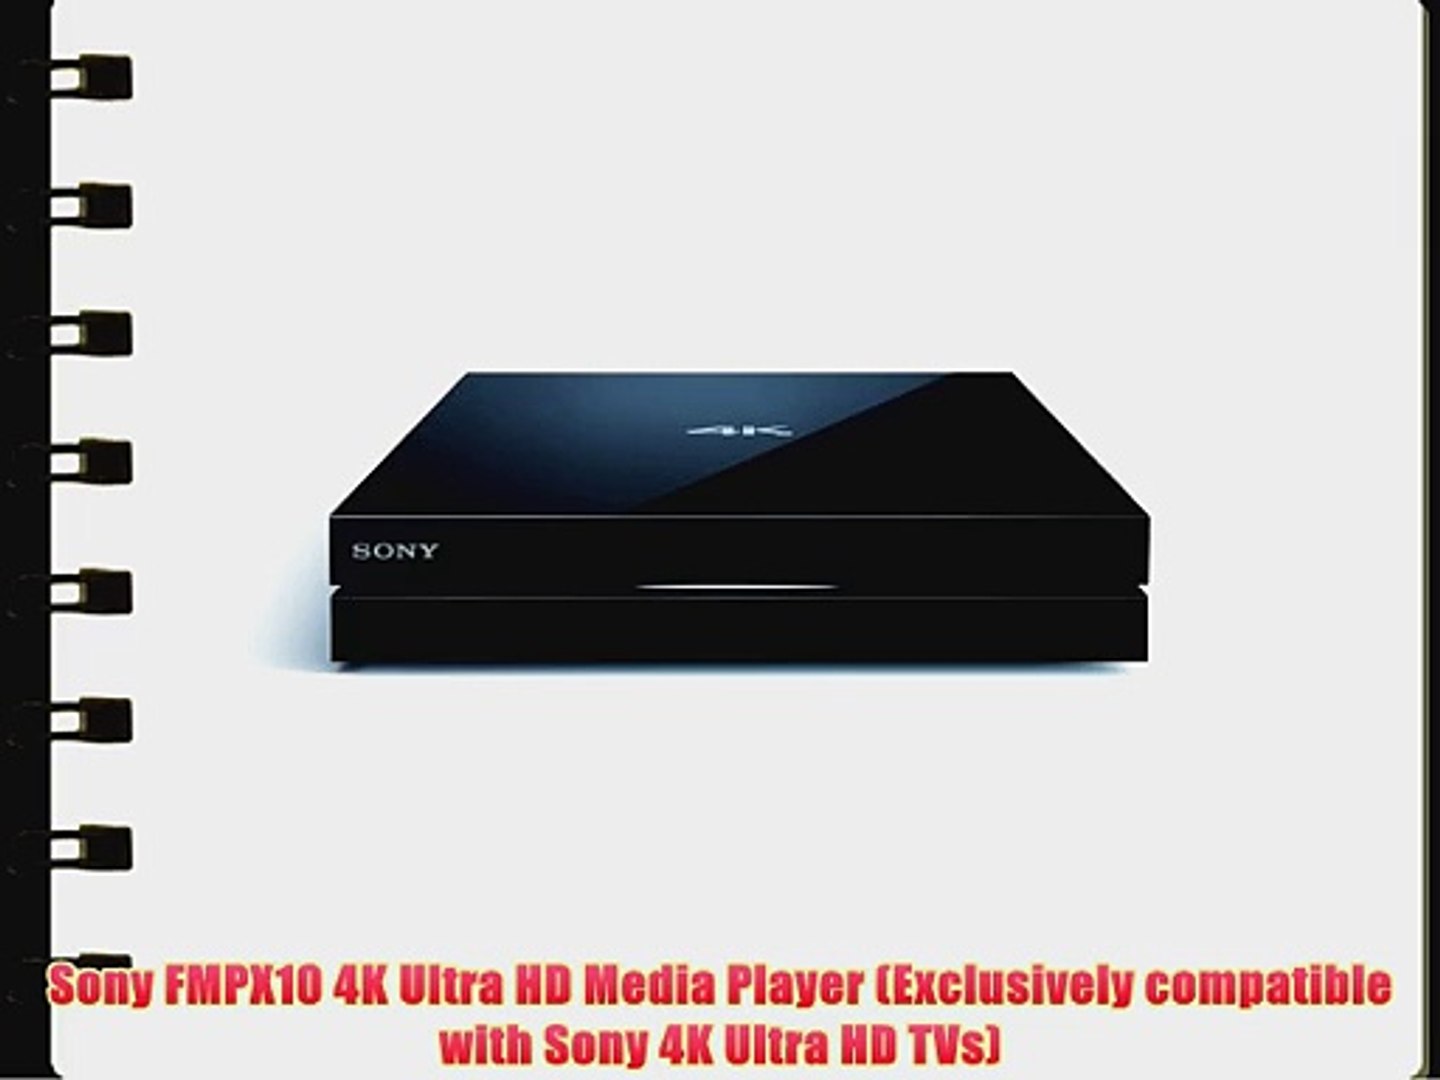 Sony FMPX10 4K Ultra HD Media Player (Exclusively compatible with Sony 4K Ultra HD TVs)